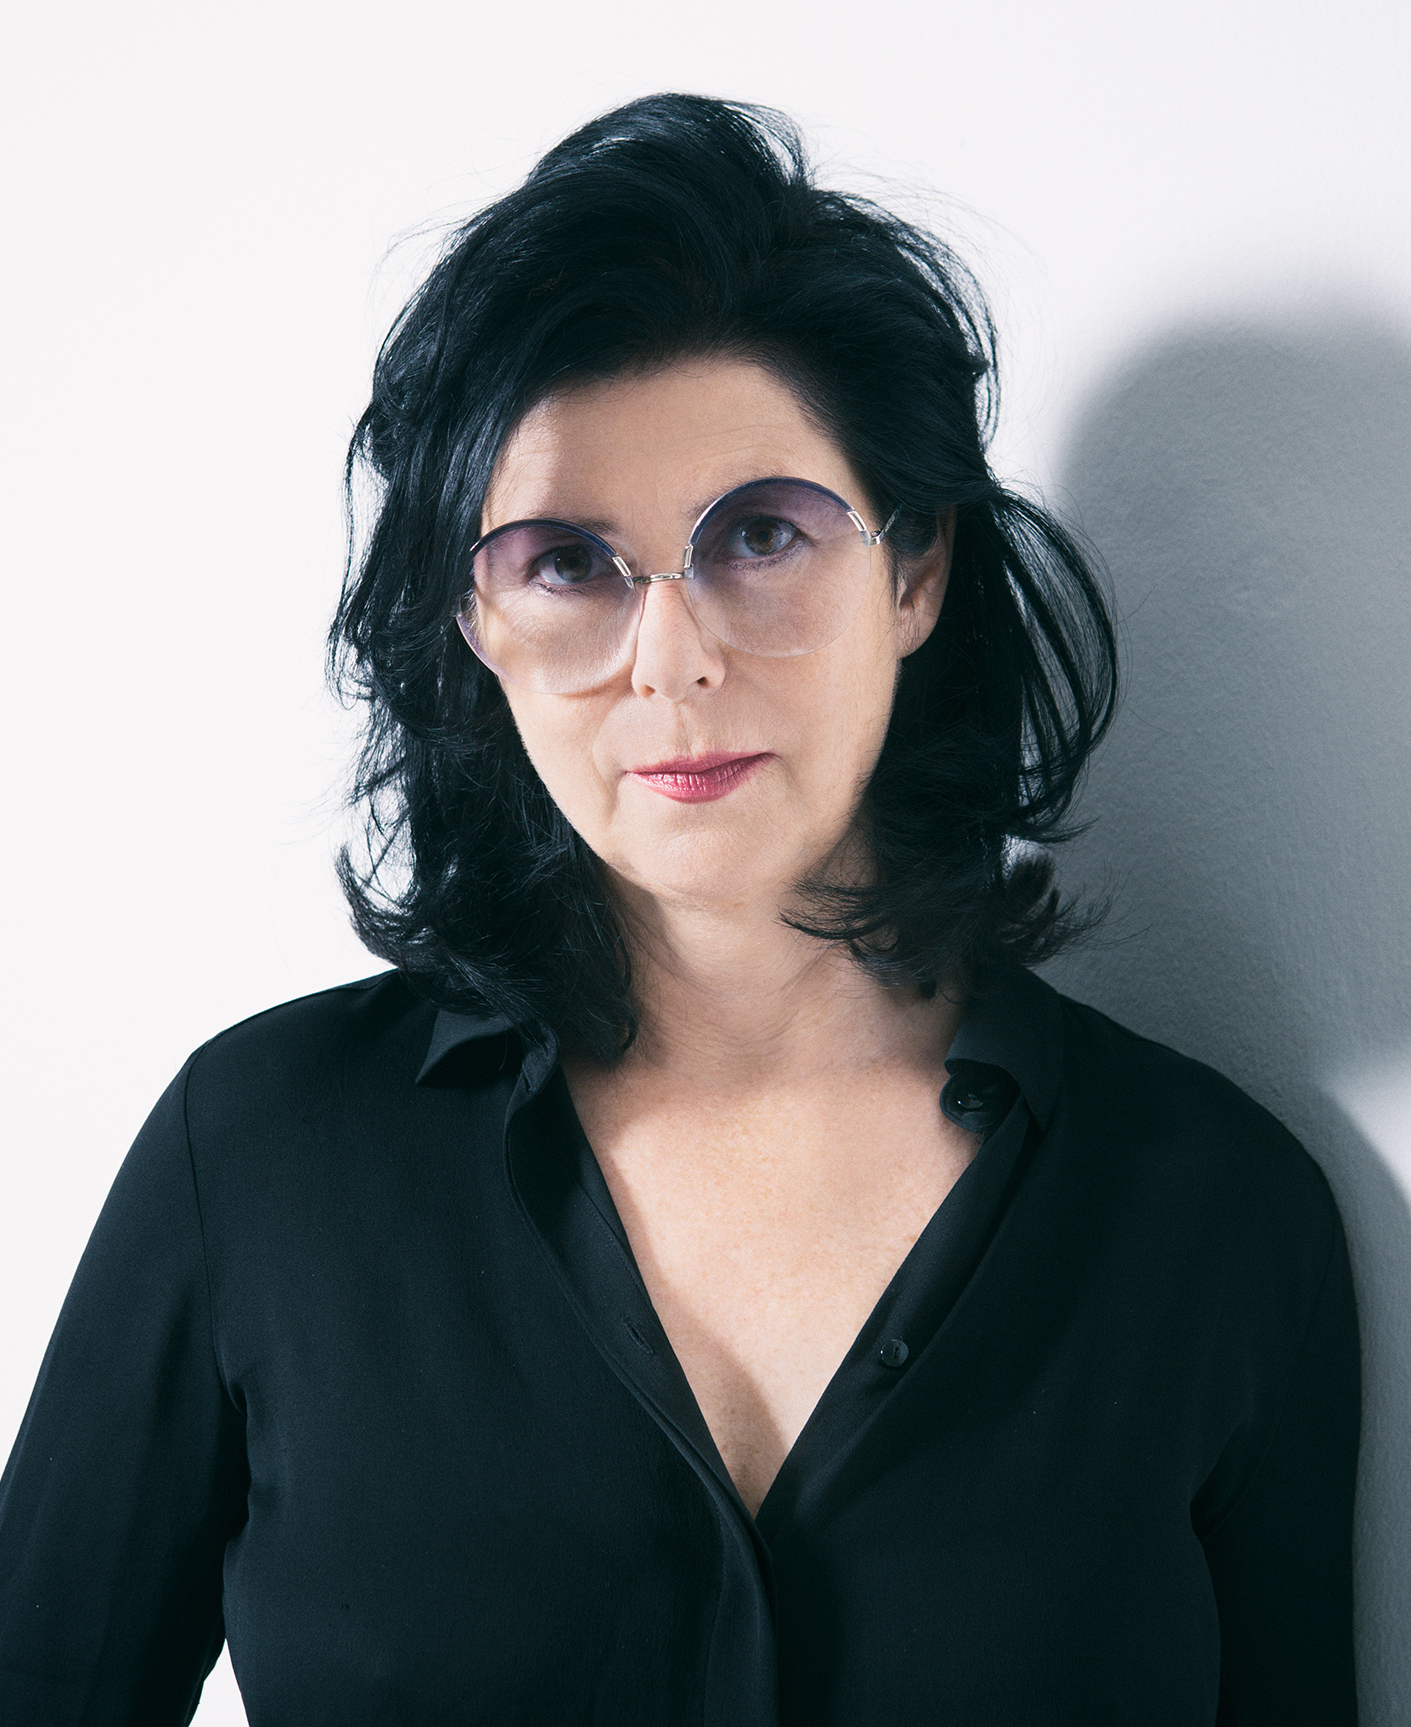 A woman with dark hair and eyes, dressed in a black v-neck, long-sleeve shirt and wearing gray-tinted glasses is looking at the camera.